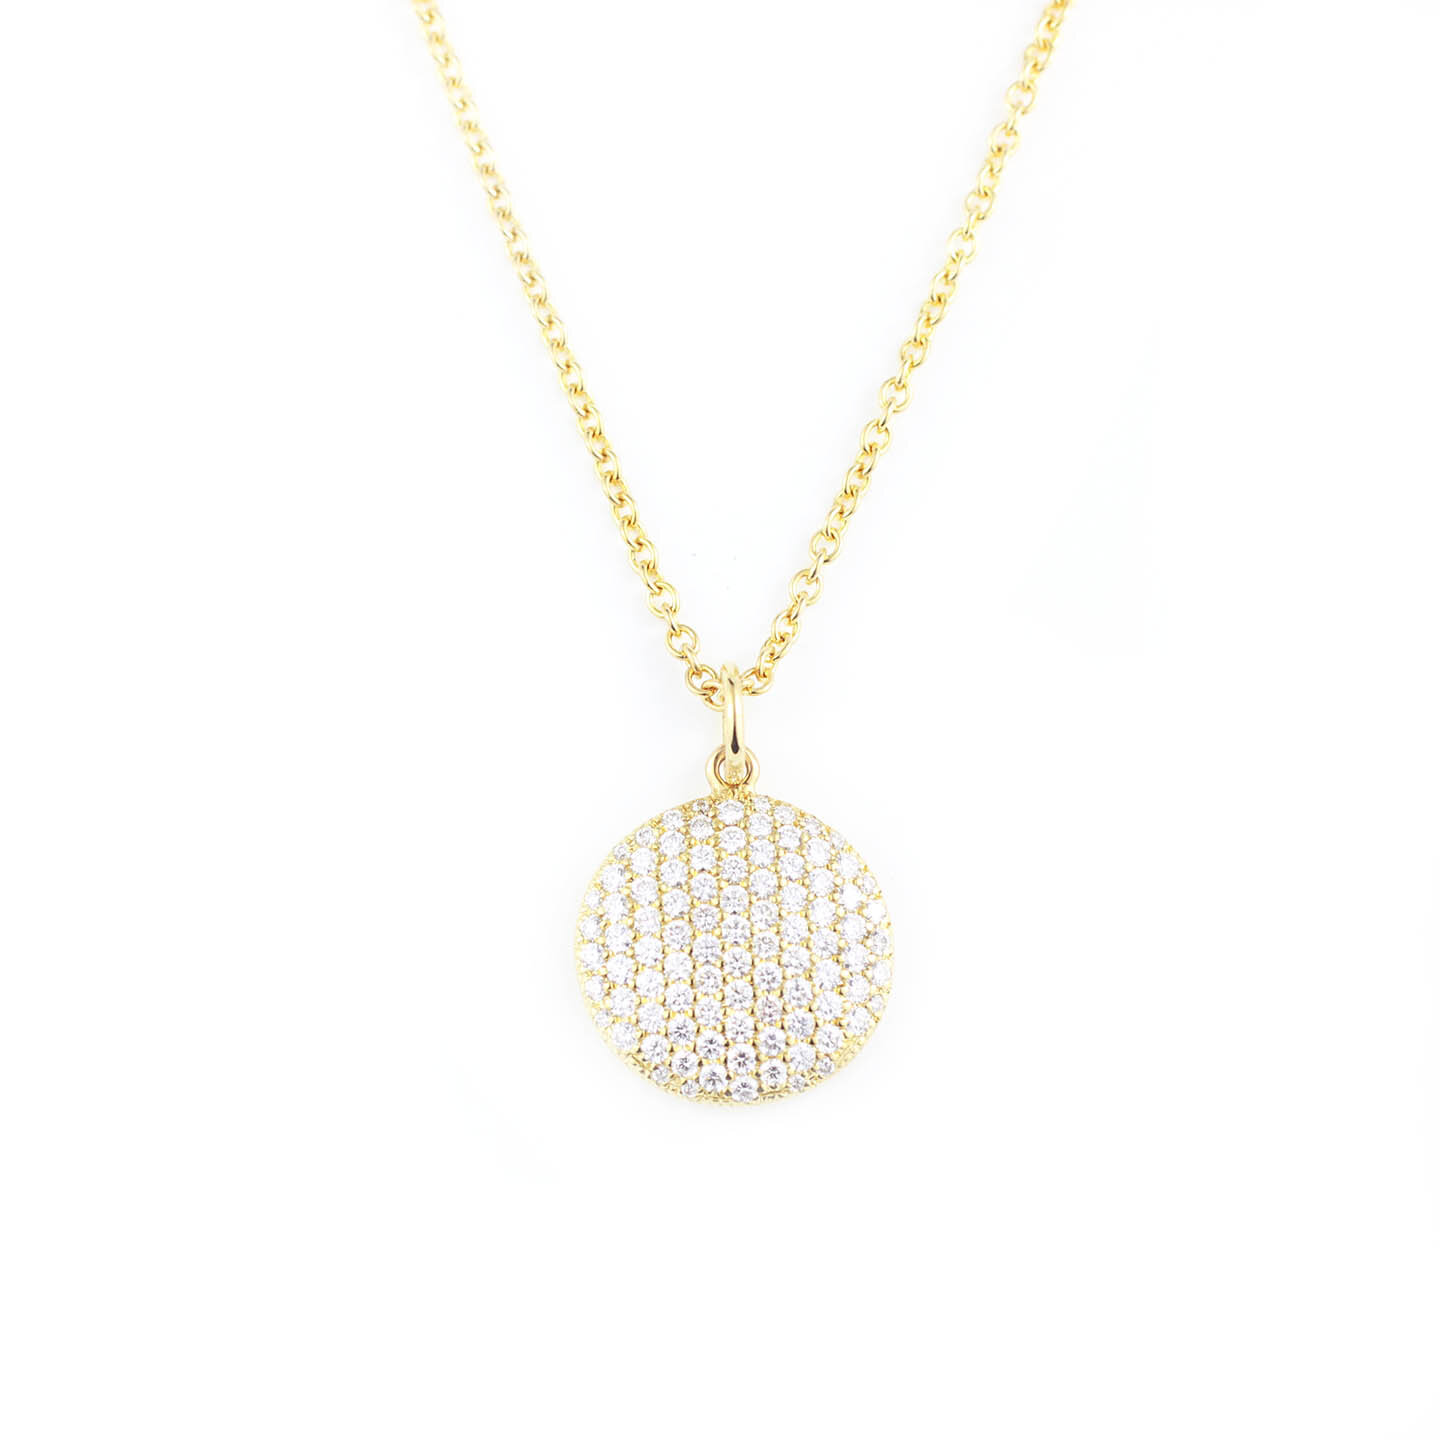 Necklet with diamond pave